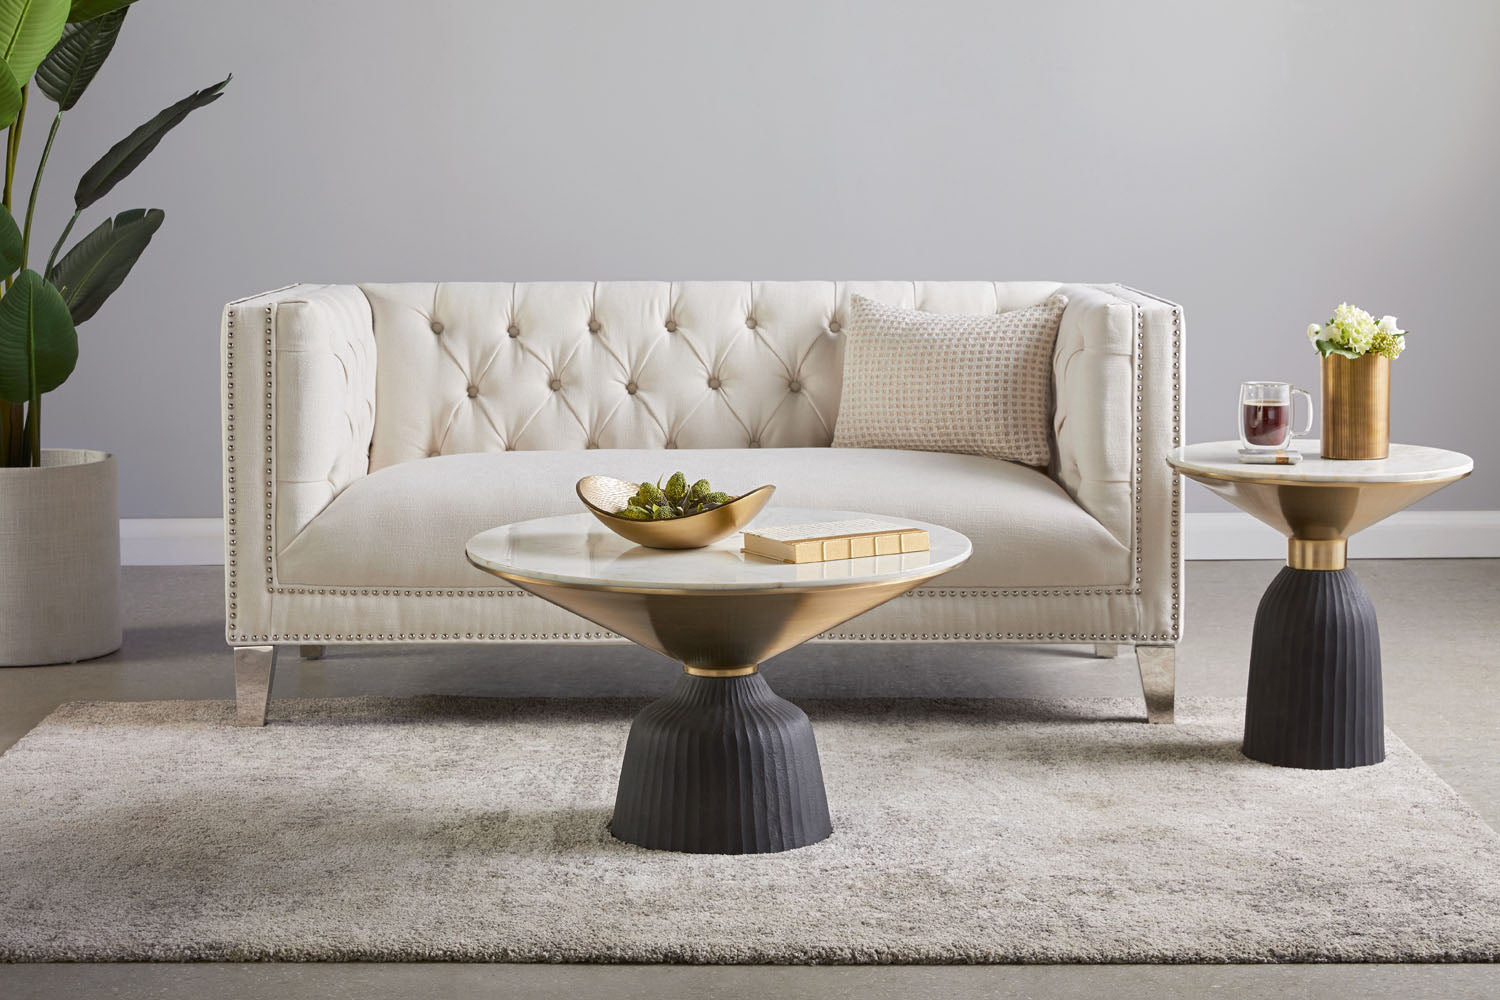 Sophie Round Marble Coffee Table with Gold and Black Base